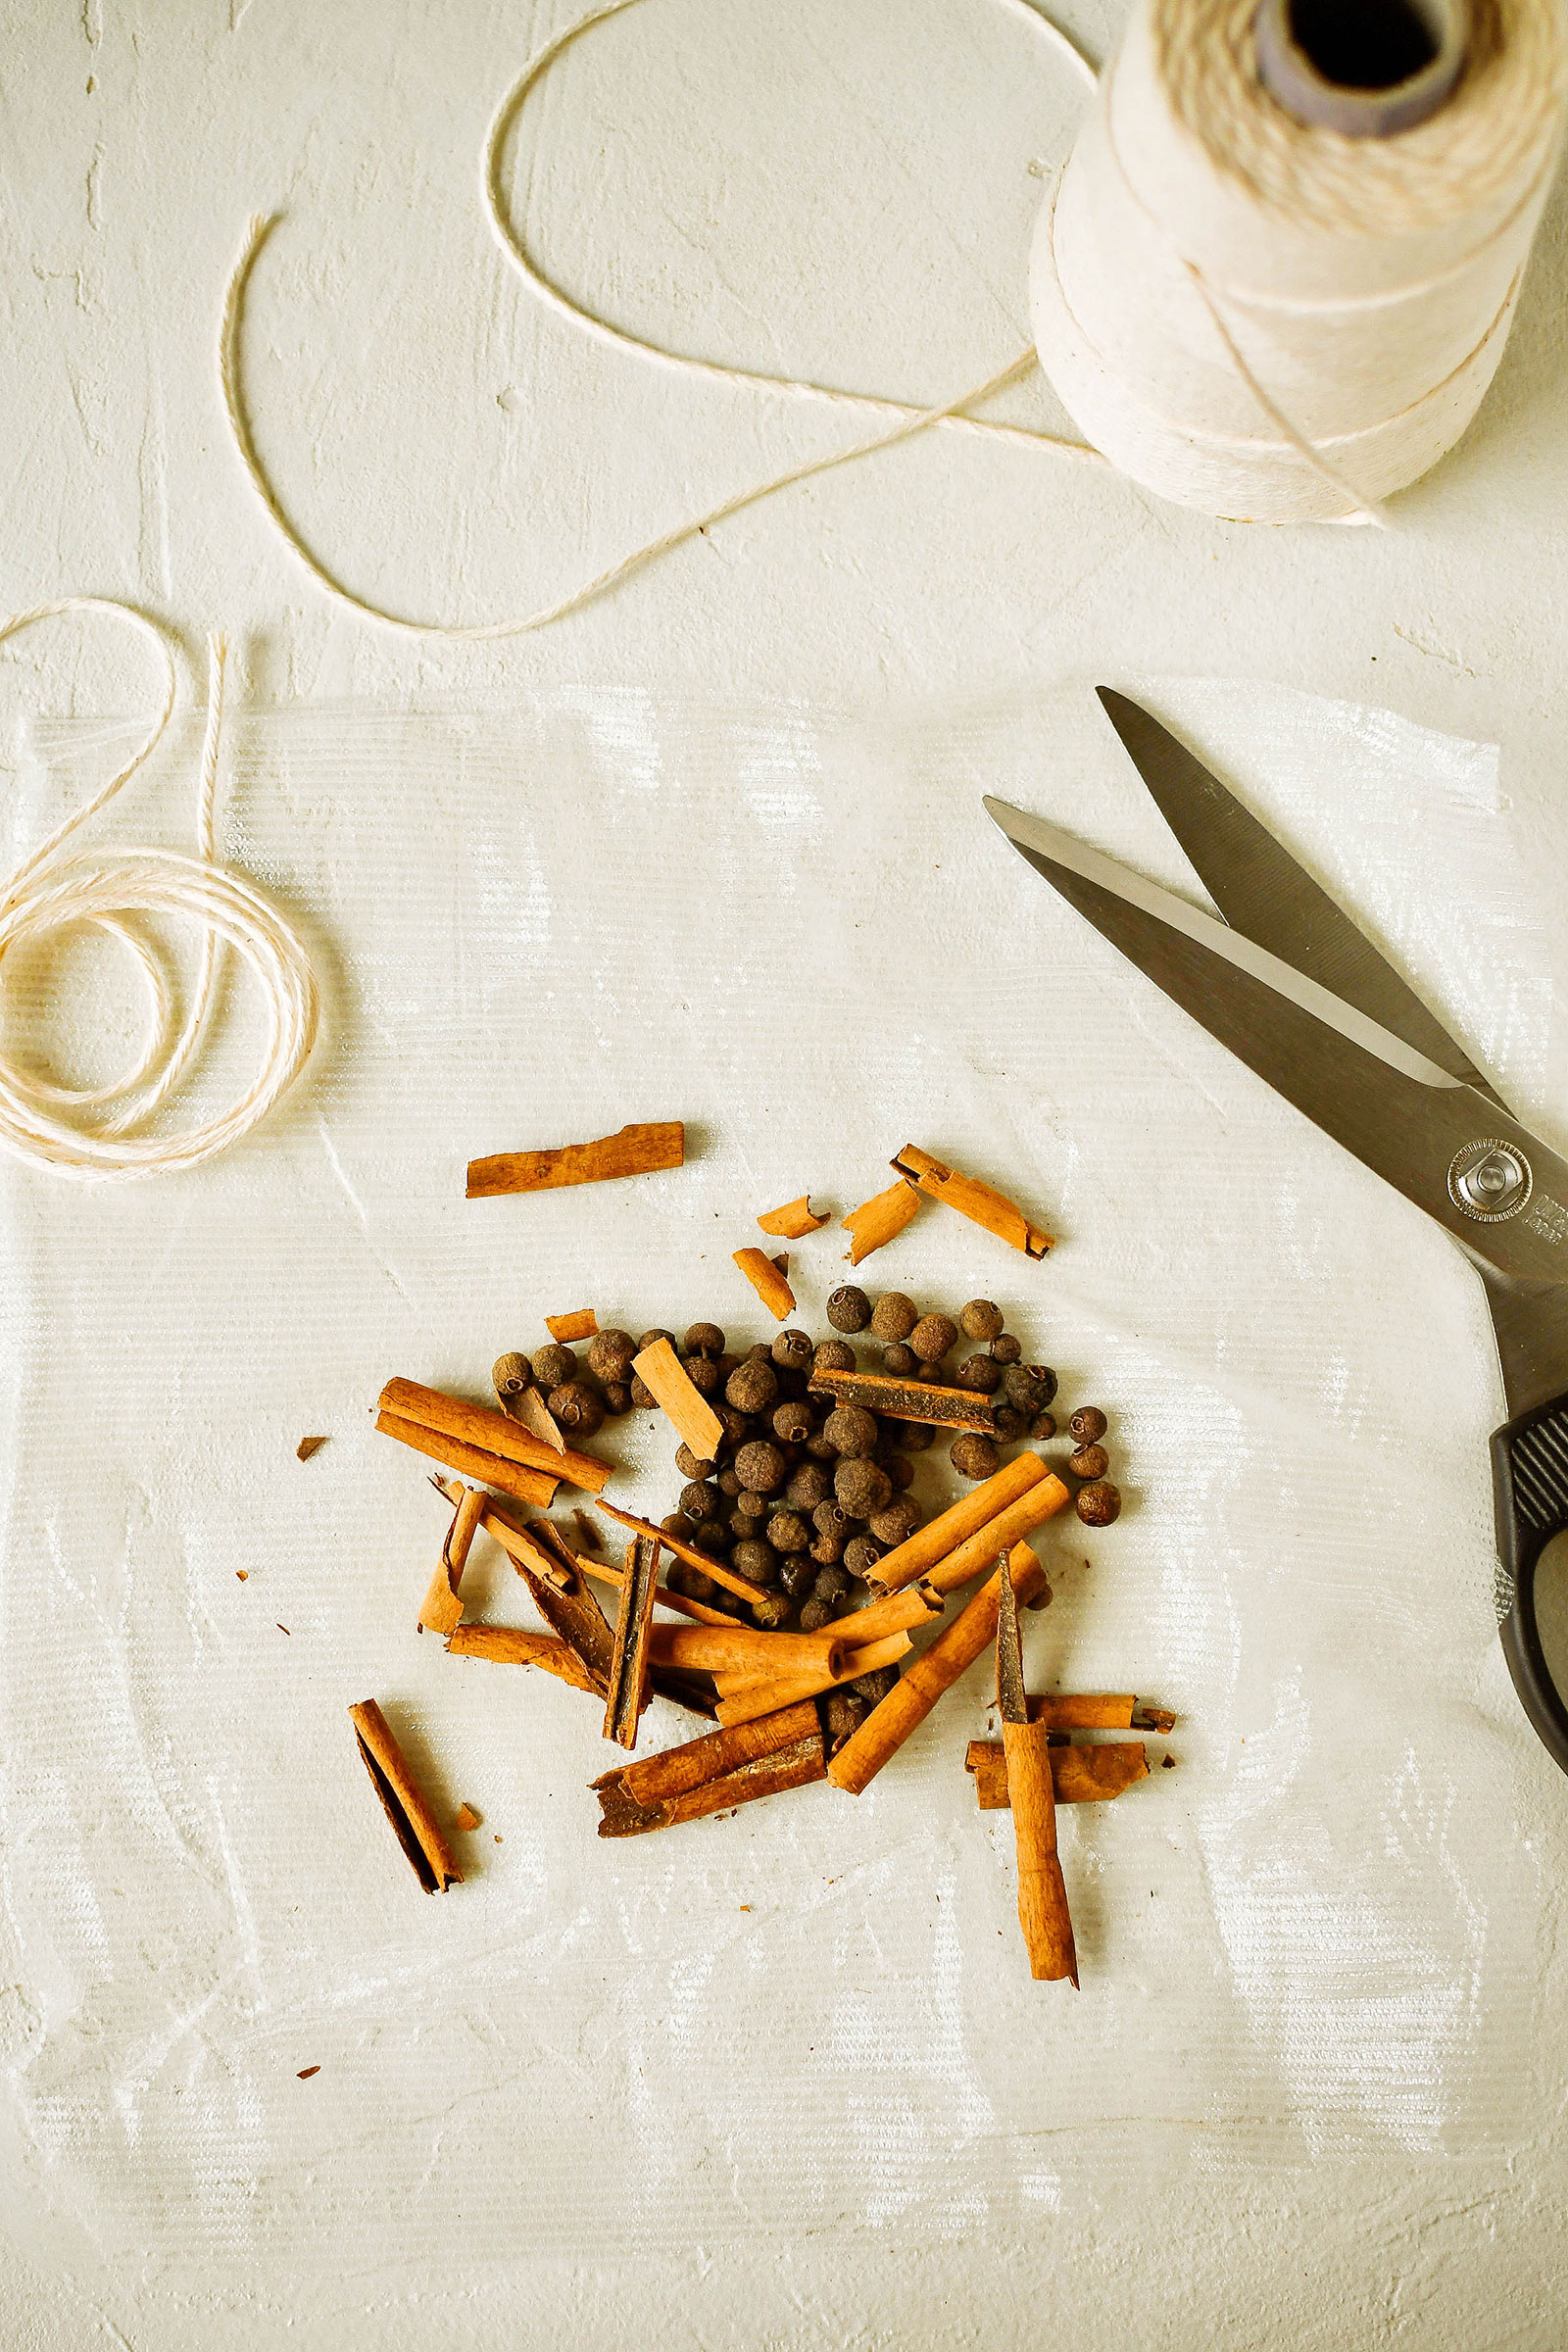 Allspice berries and broken cinnamon sticks on a white film, next to a roll of twine and a pair of scissors